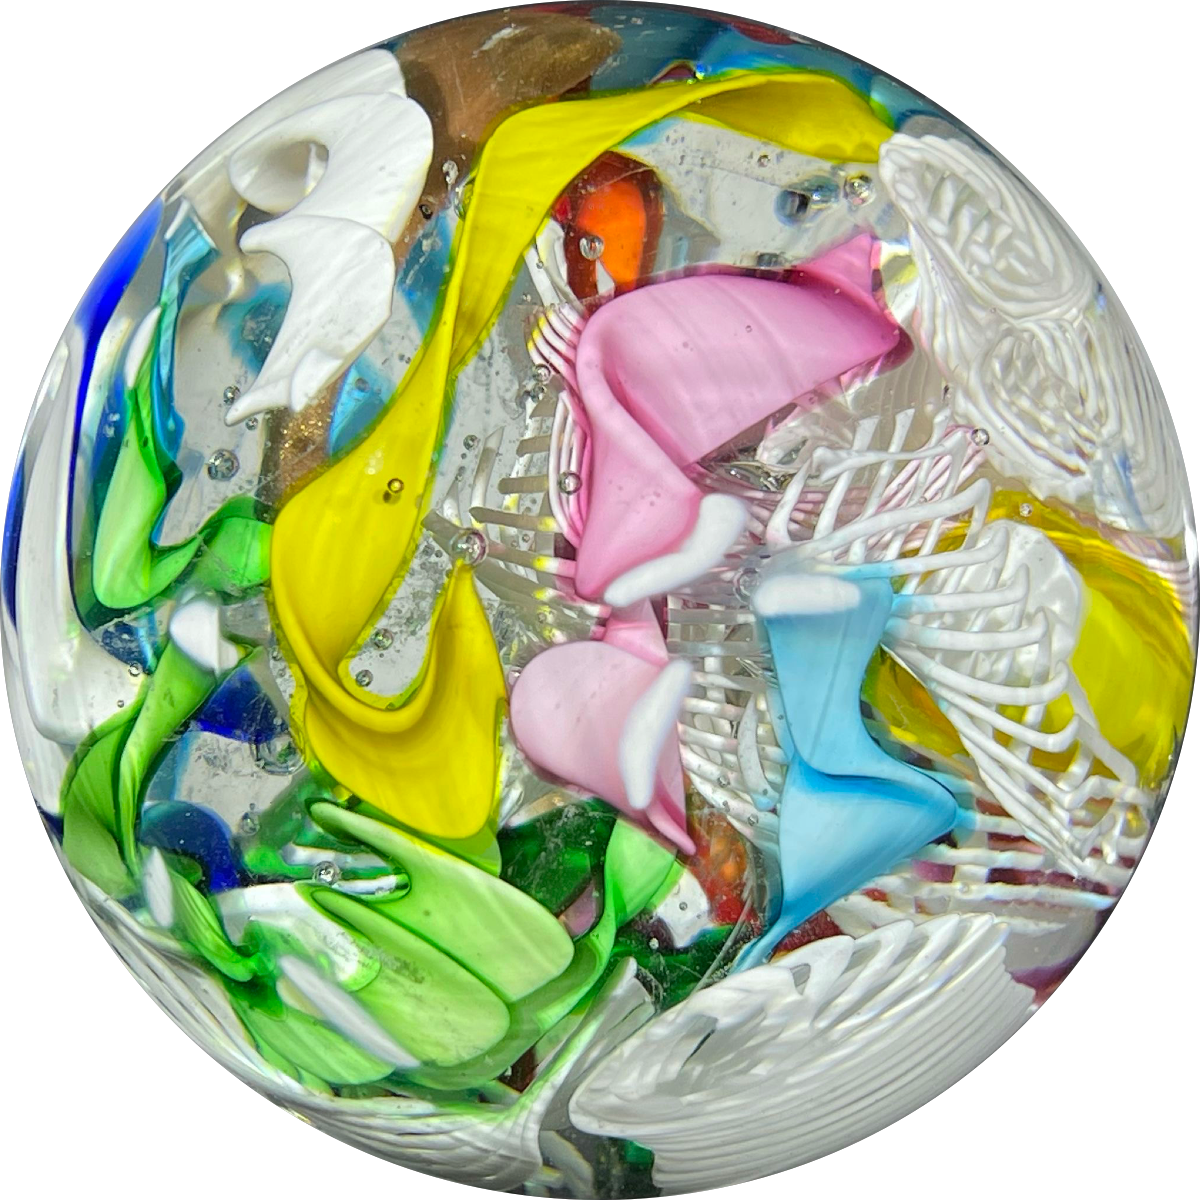 Vintage Murano Art Glass Paperweight Scramble With Colorful Ribbon Twists and Latticino